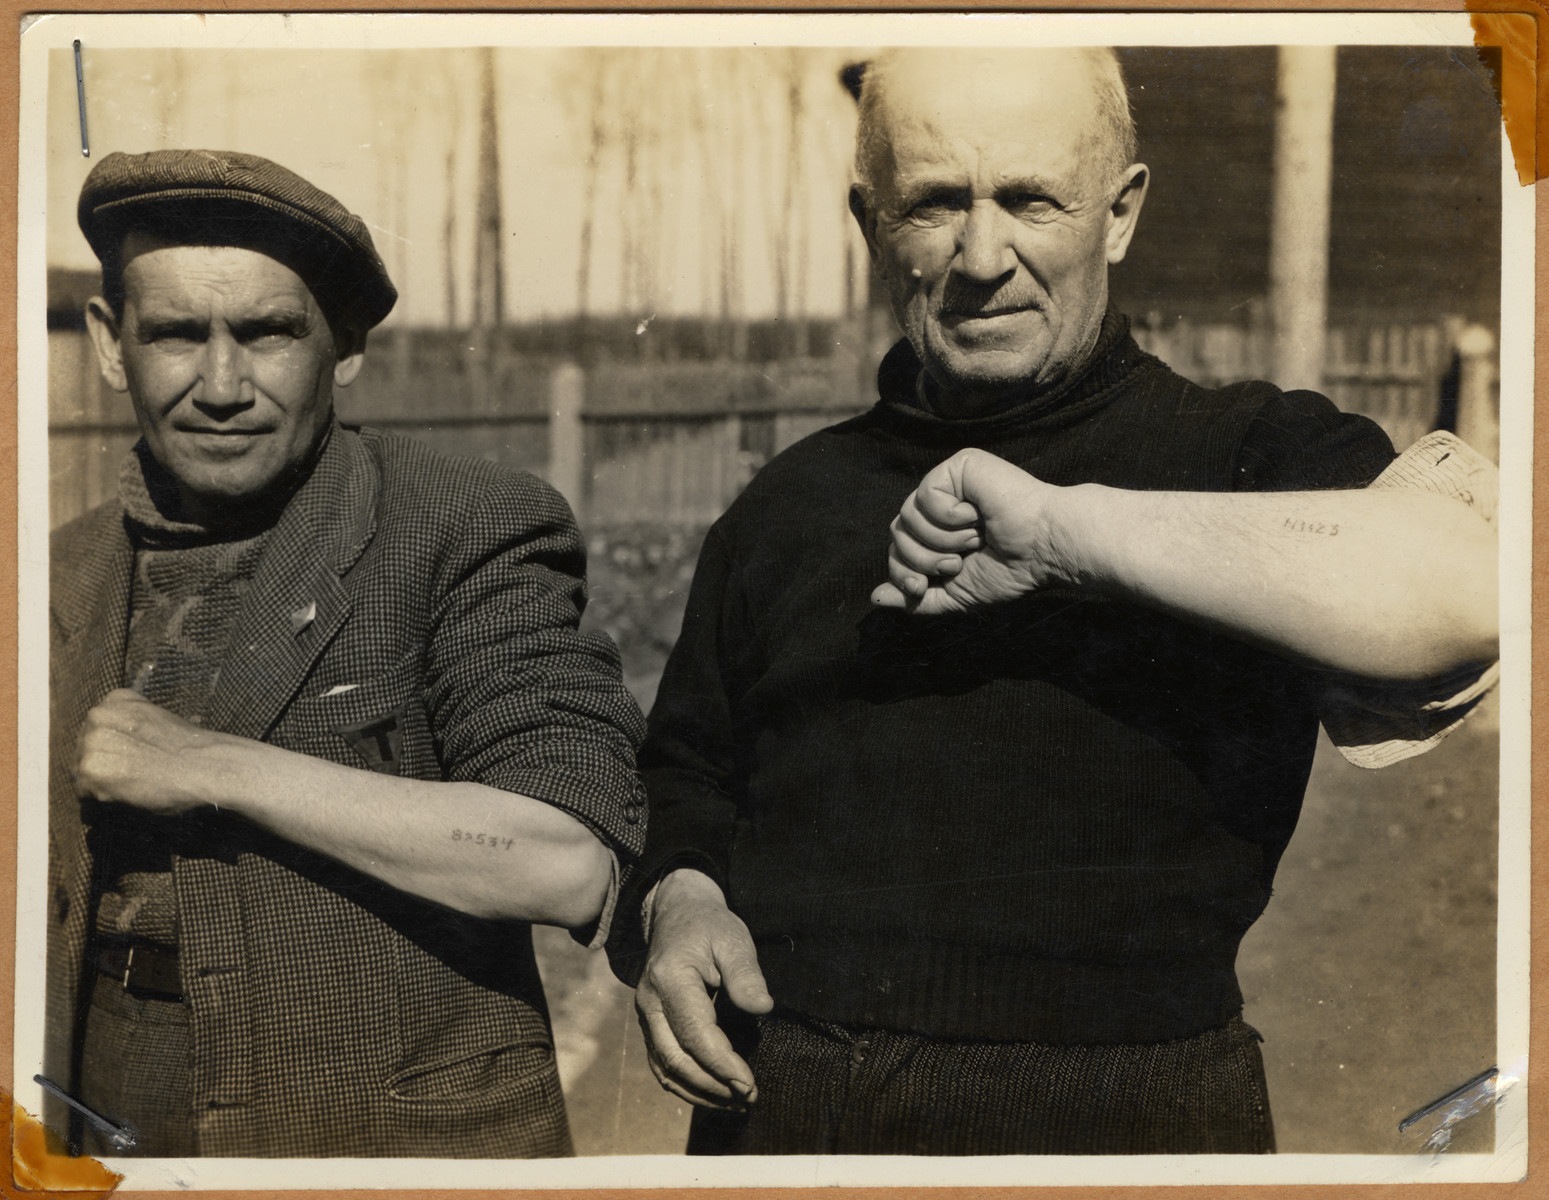 Survivors showing their tattoos after the liberation of Buchenwald.

The lender's handwritten caption reads, "Two men showing numbers branded on arms.  All clothing was also stamped where it was readily seen."